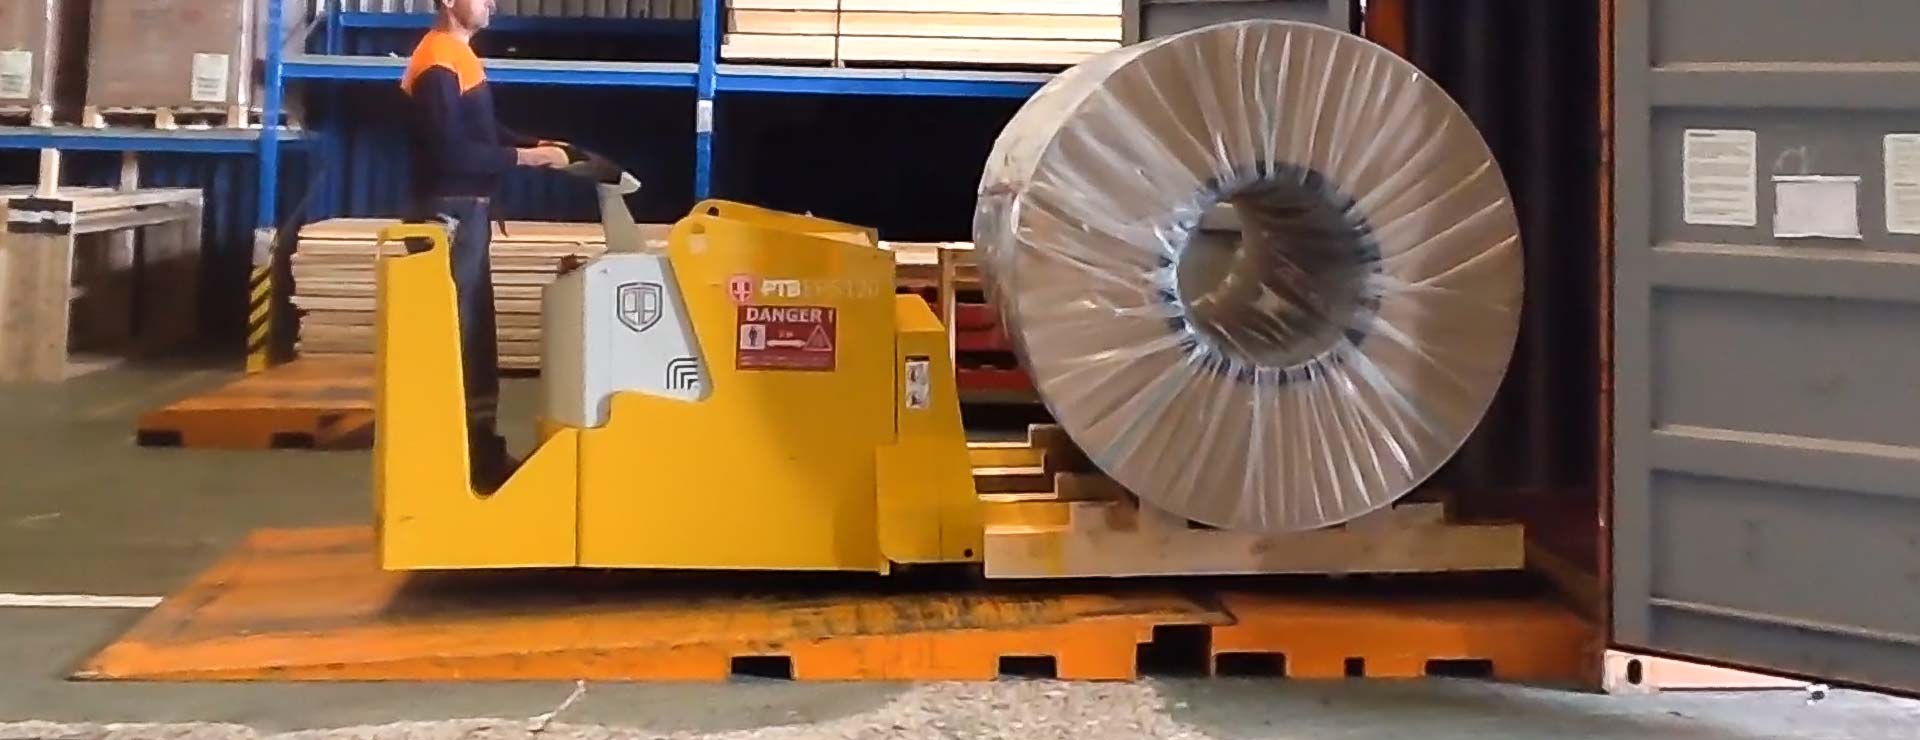 12 ton coils over a 10% slope into a shipping container